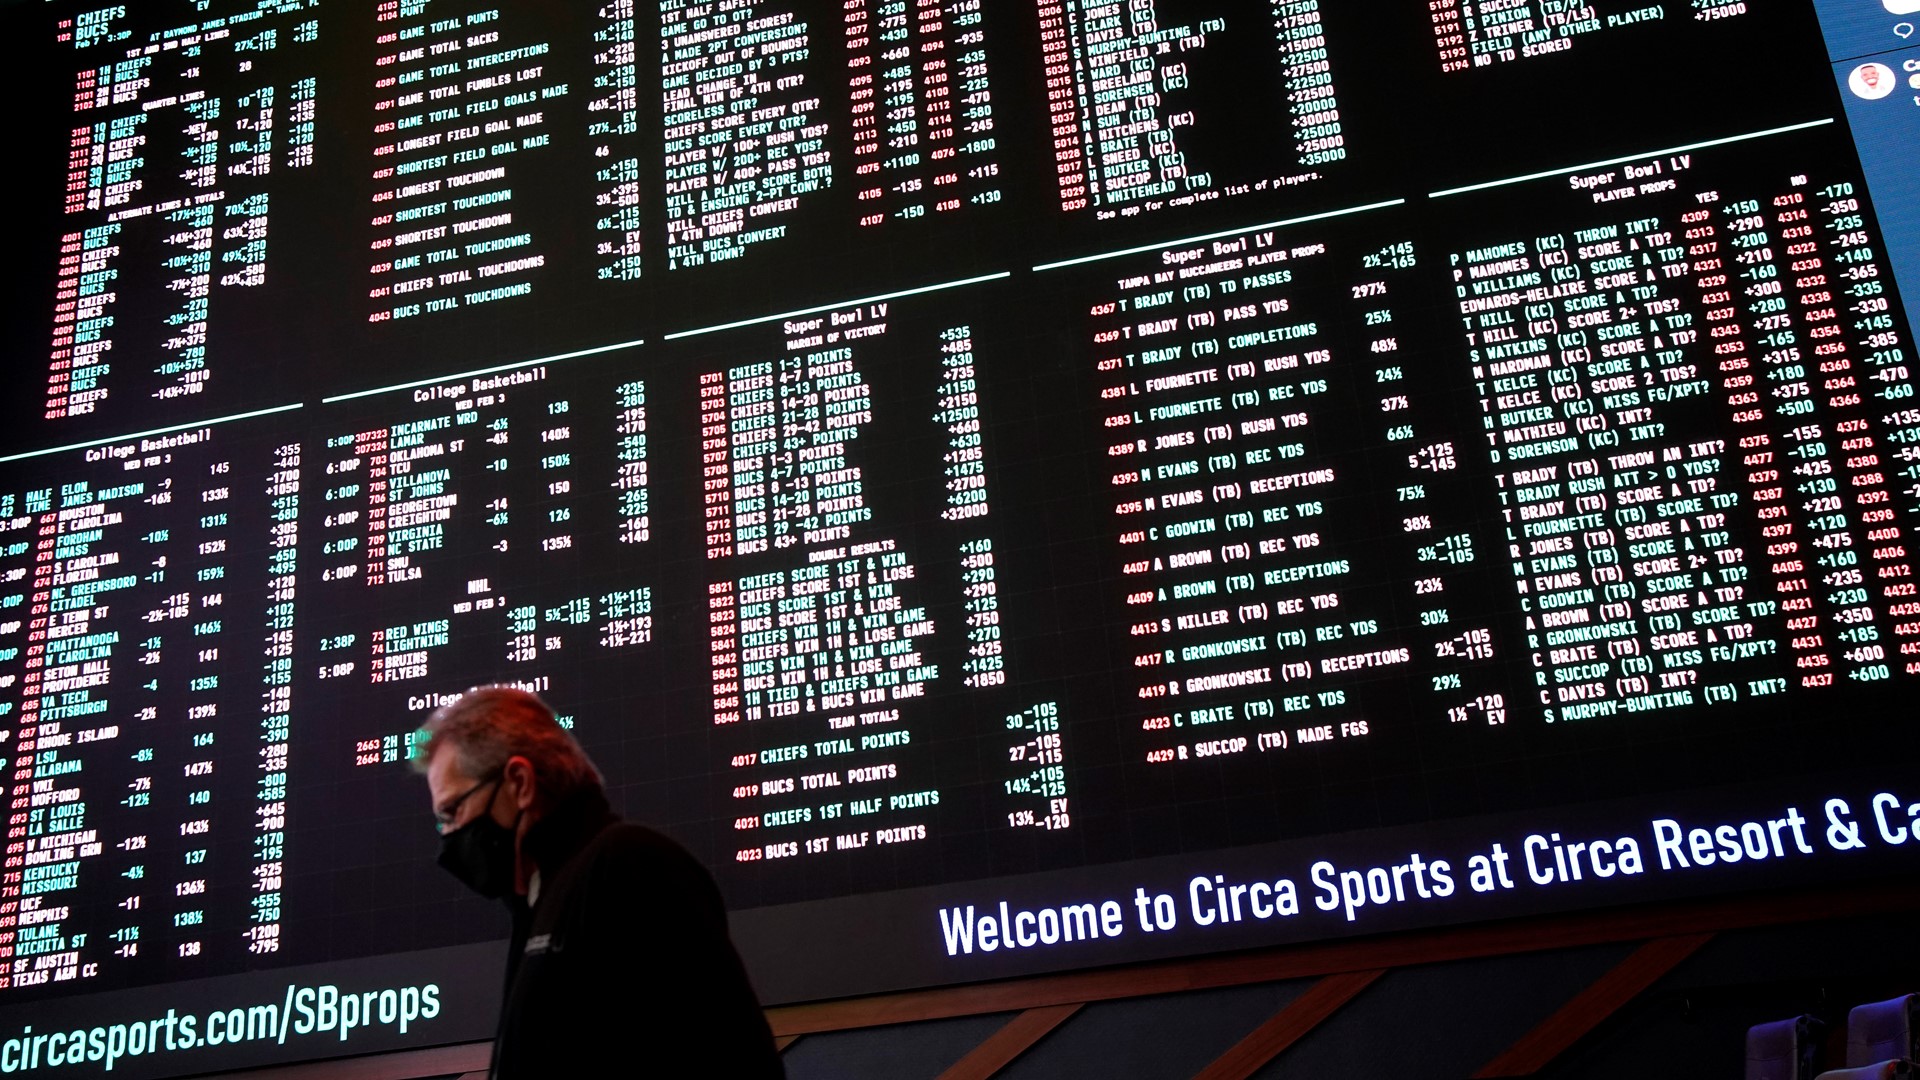 With online registration and the first year to bet on March Madness legally in the state, Iowa could see a boom this month in wagers placed.